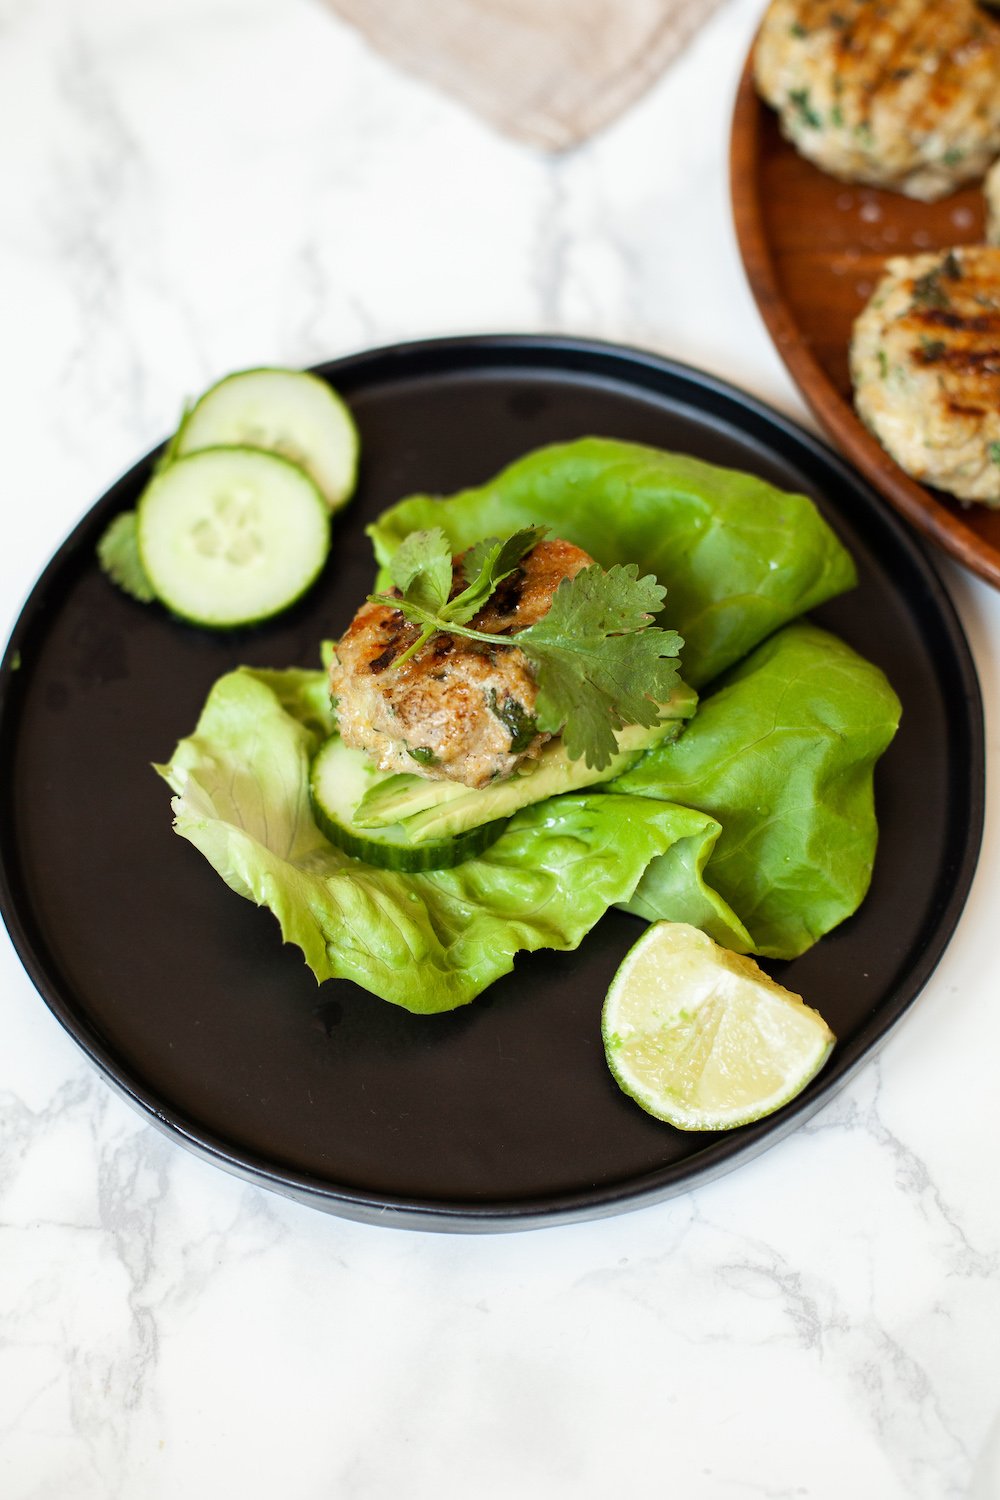 easy recipe for an Asian Spiecd Chicken Burger in a Lettuce Wrap gluten free, paleo, whole 30